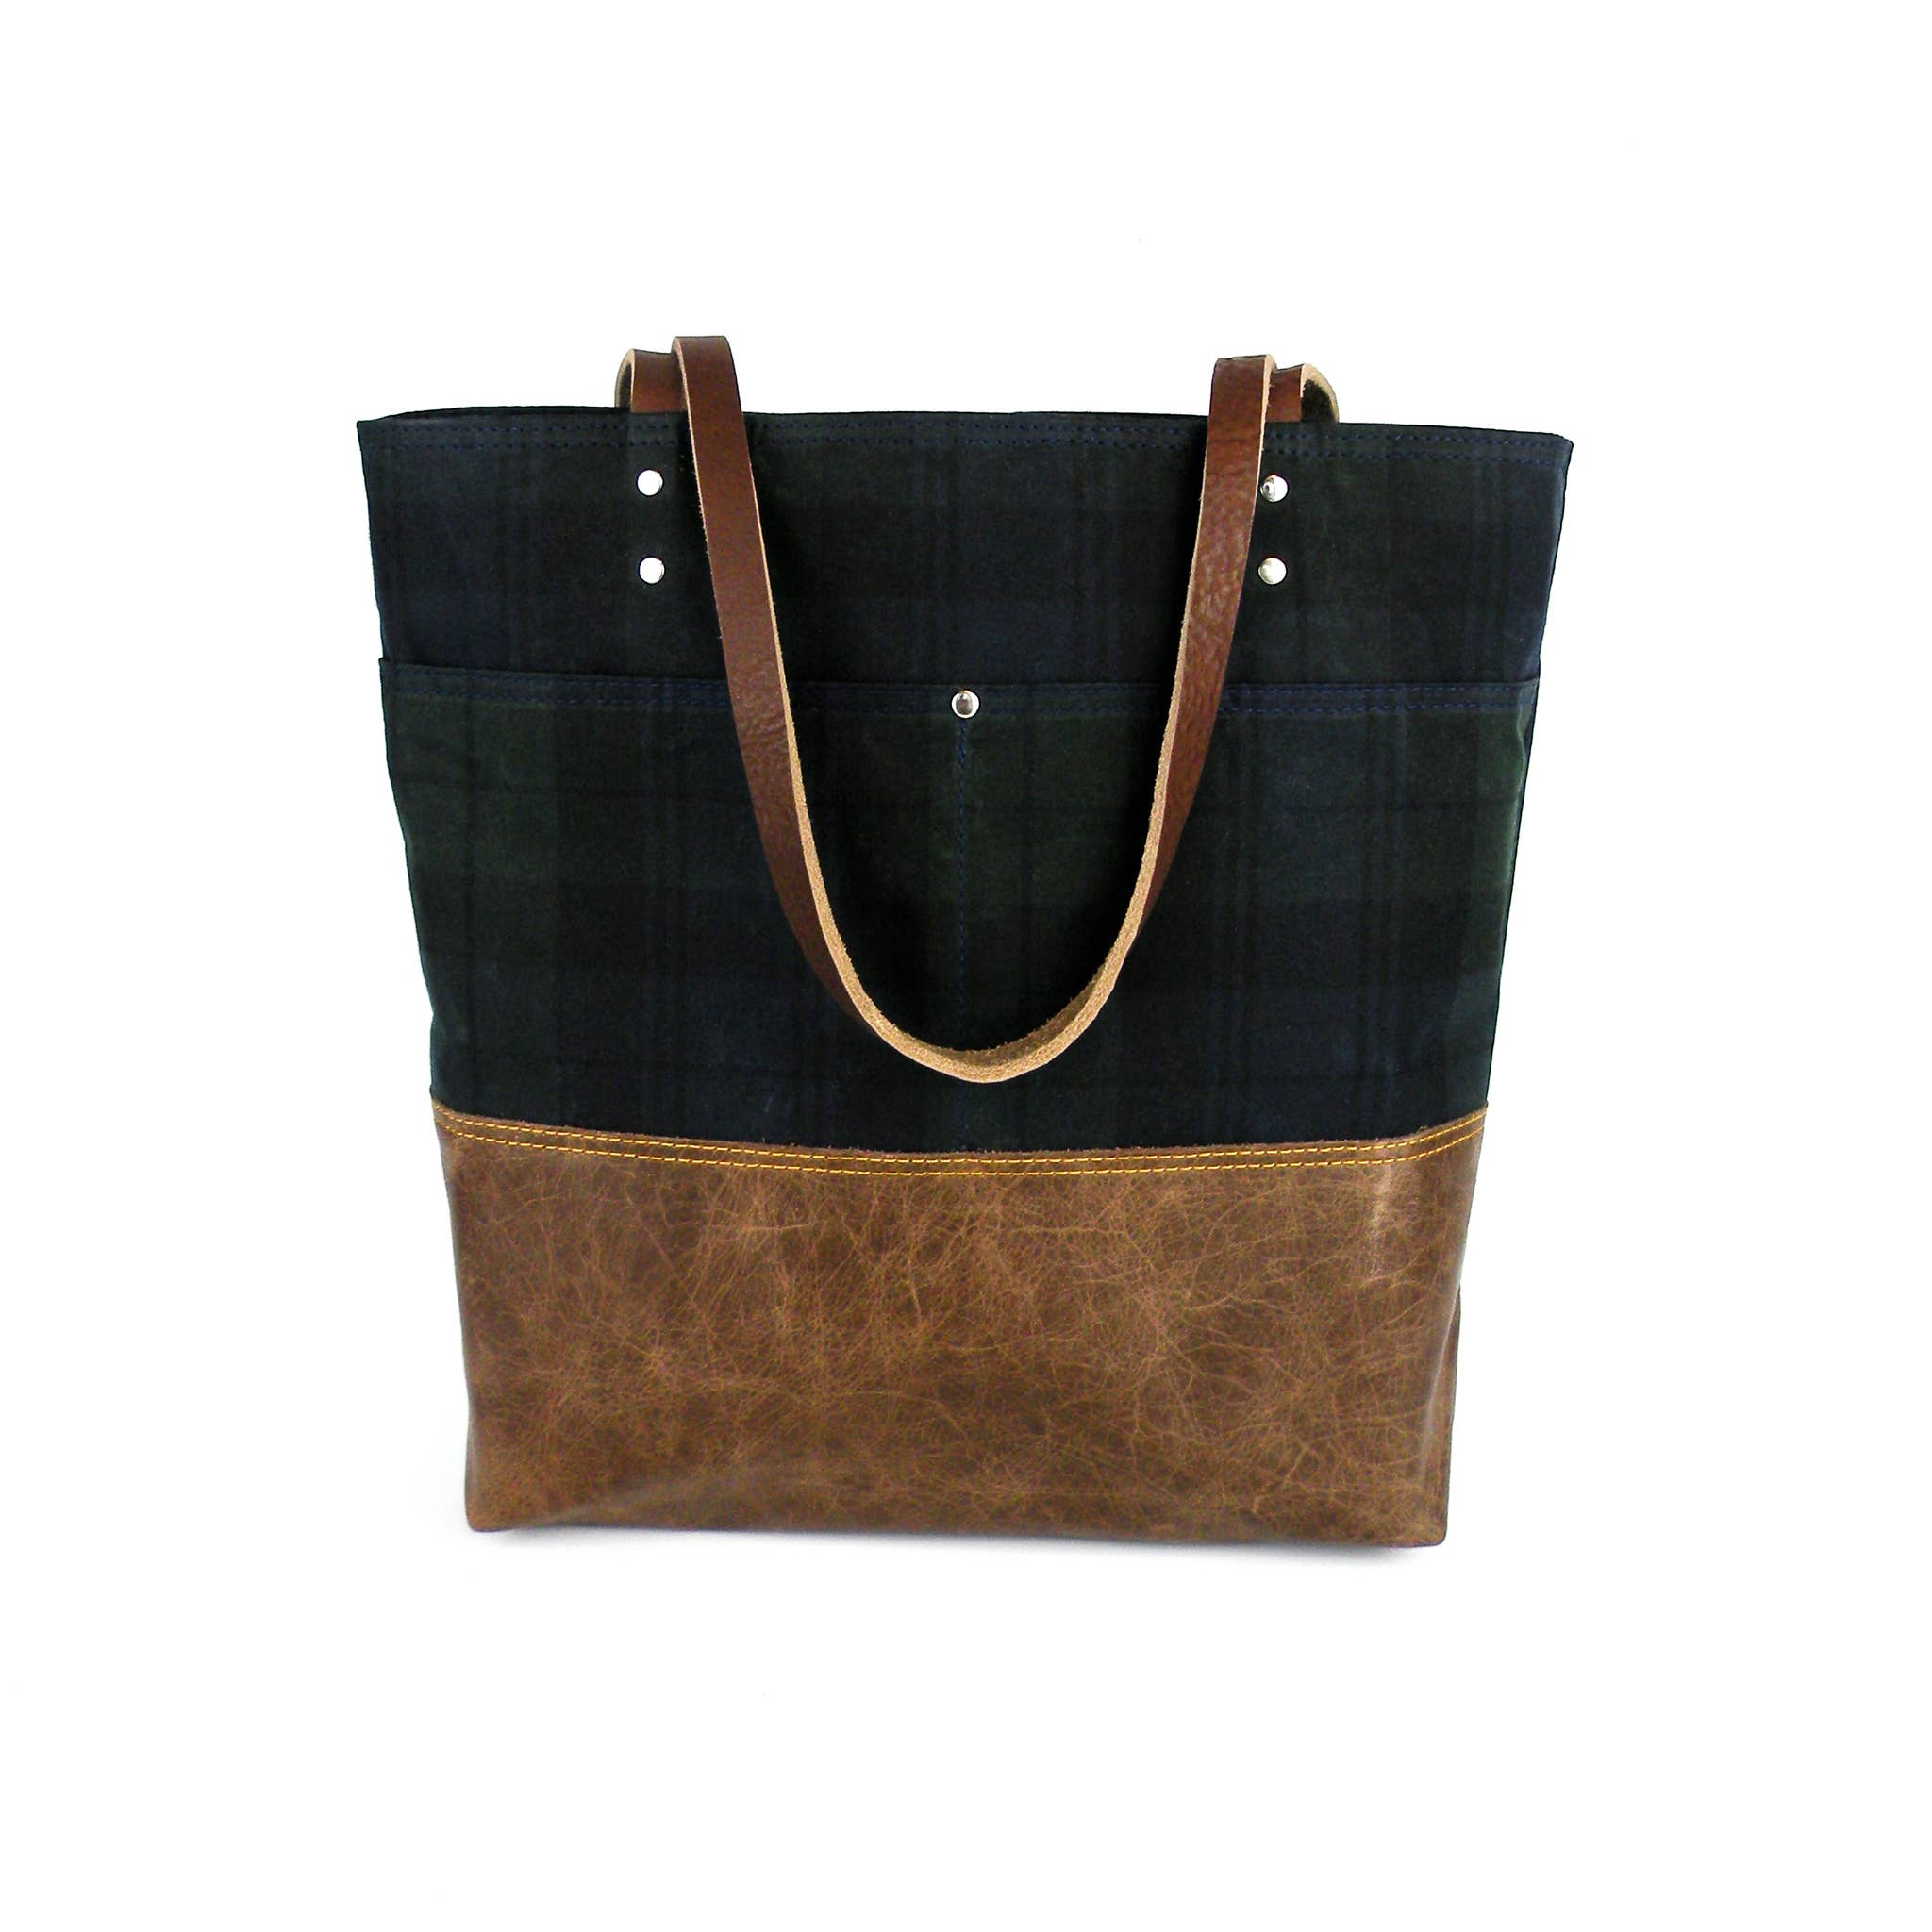 Urban Tote in black watch Plaid & Distressed Leather